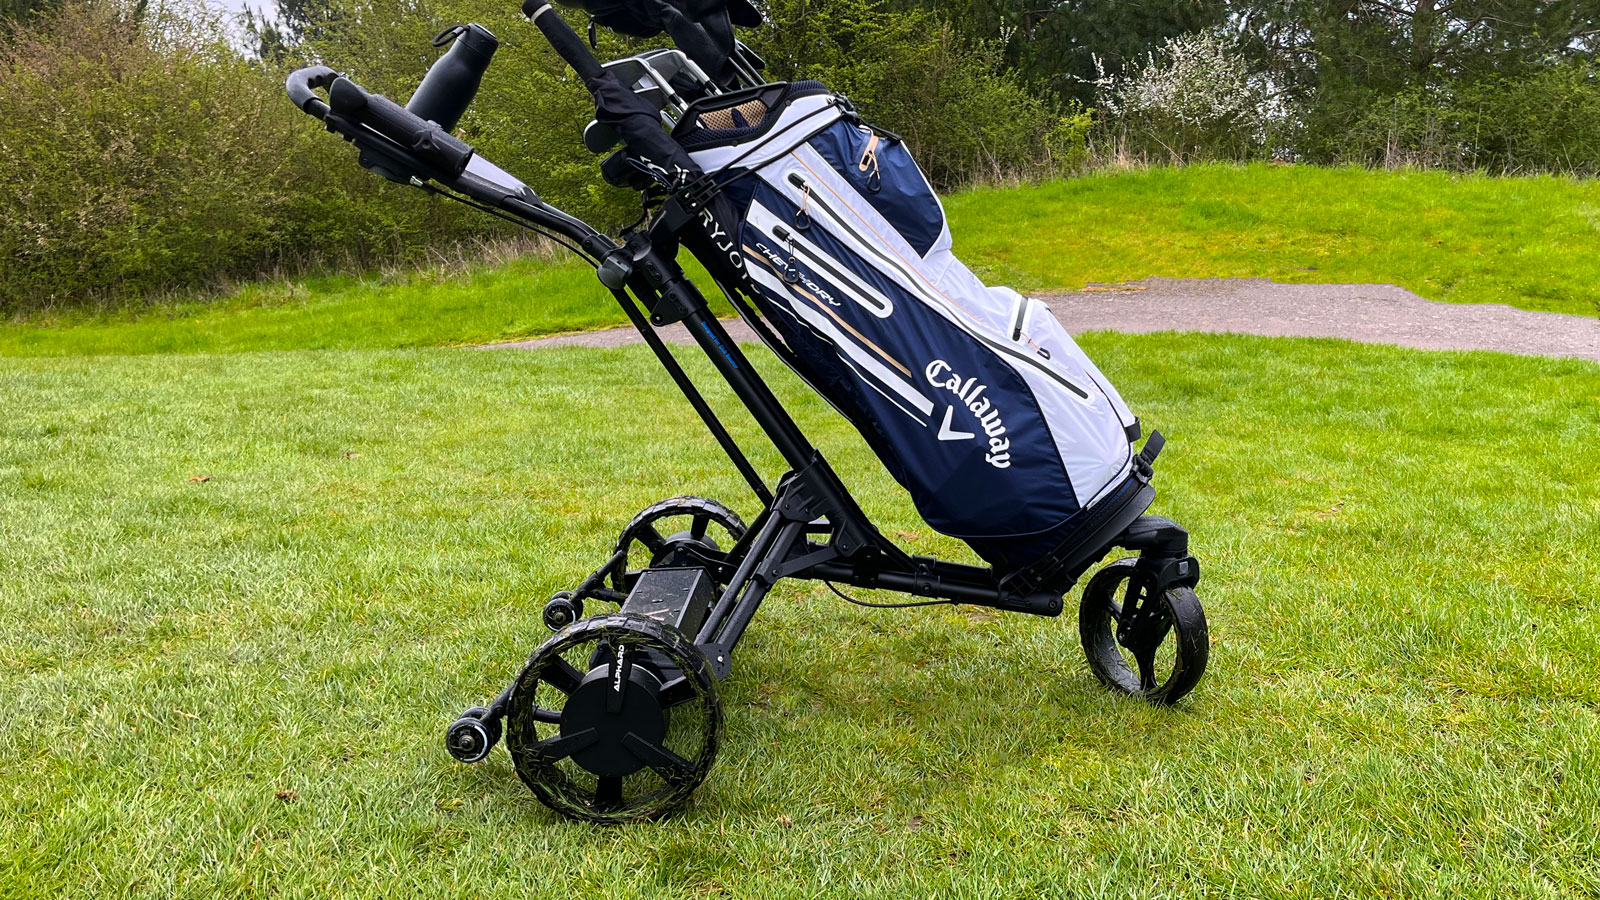 The Alphard Club Booster V2 on the golf course attached to the Alphard Omnicart